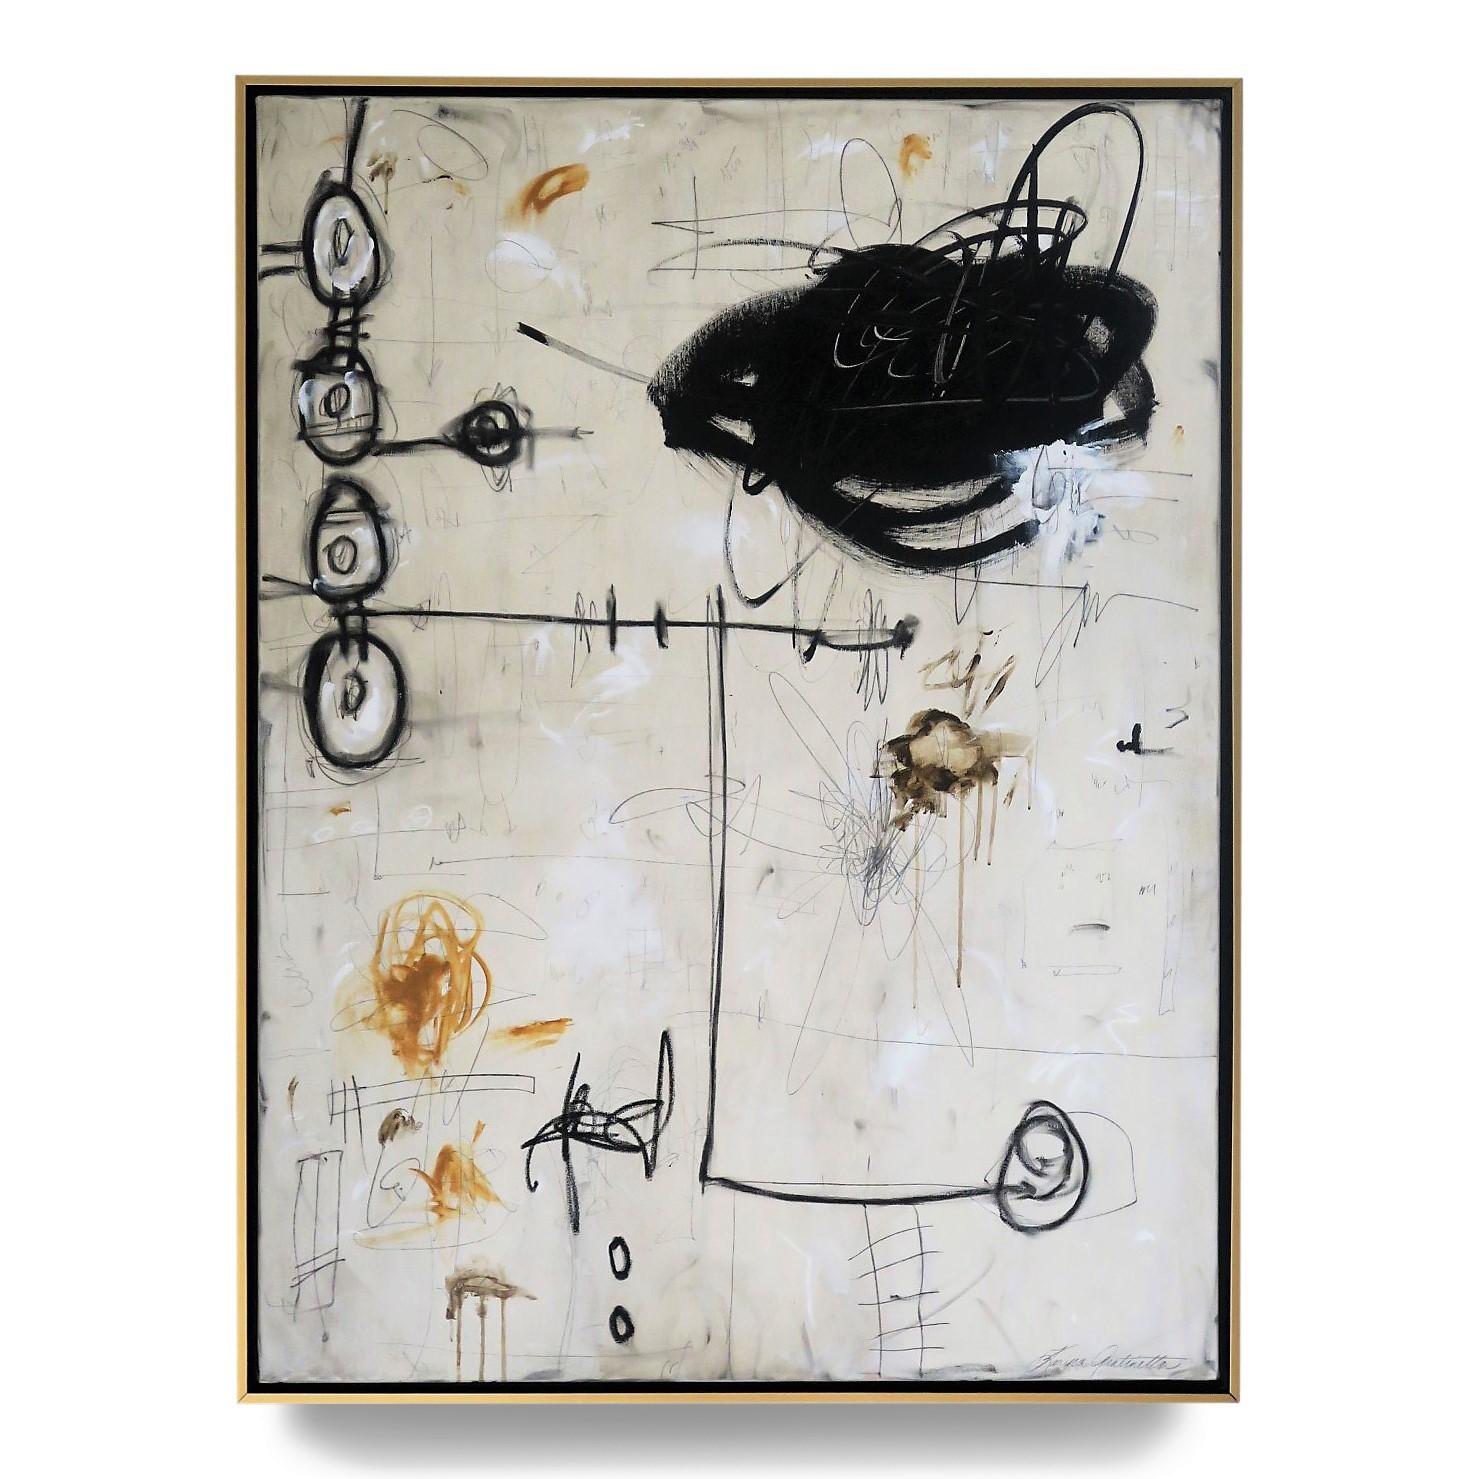 "Out of Time" Original Abstract Painting in Earth Tones, 48" x 36" - Mixed Media Art by Karina Gentinetta